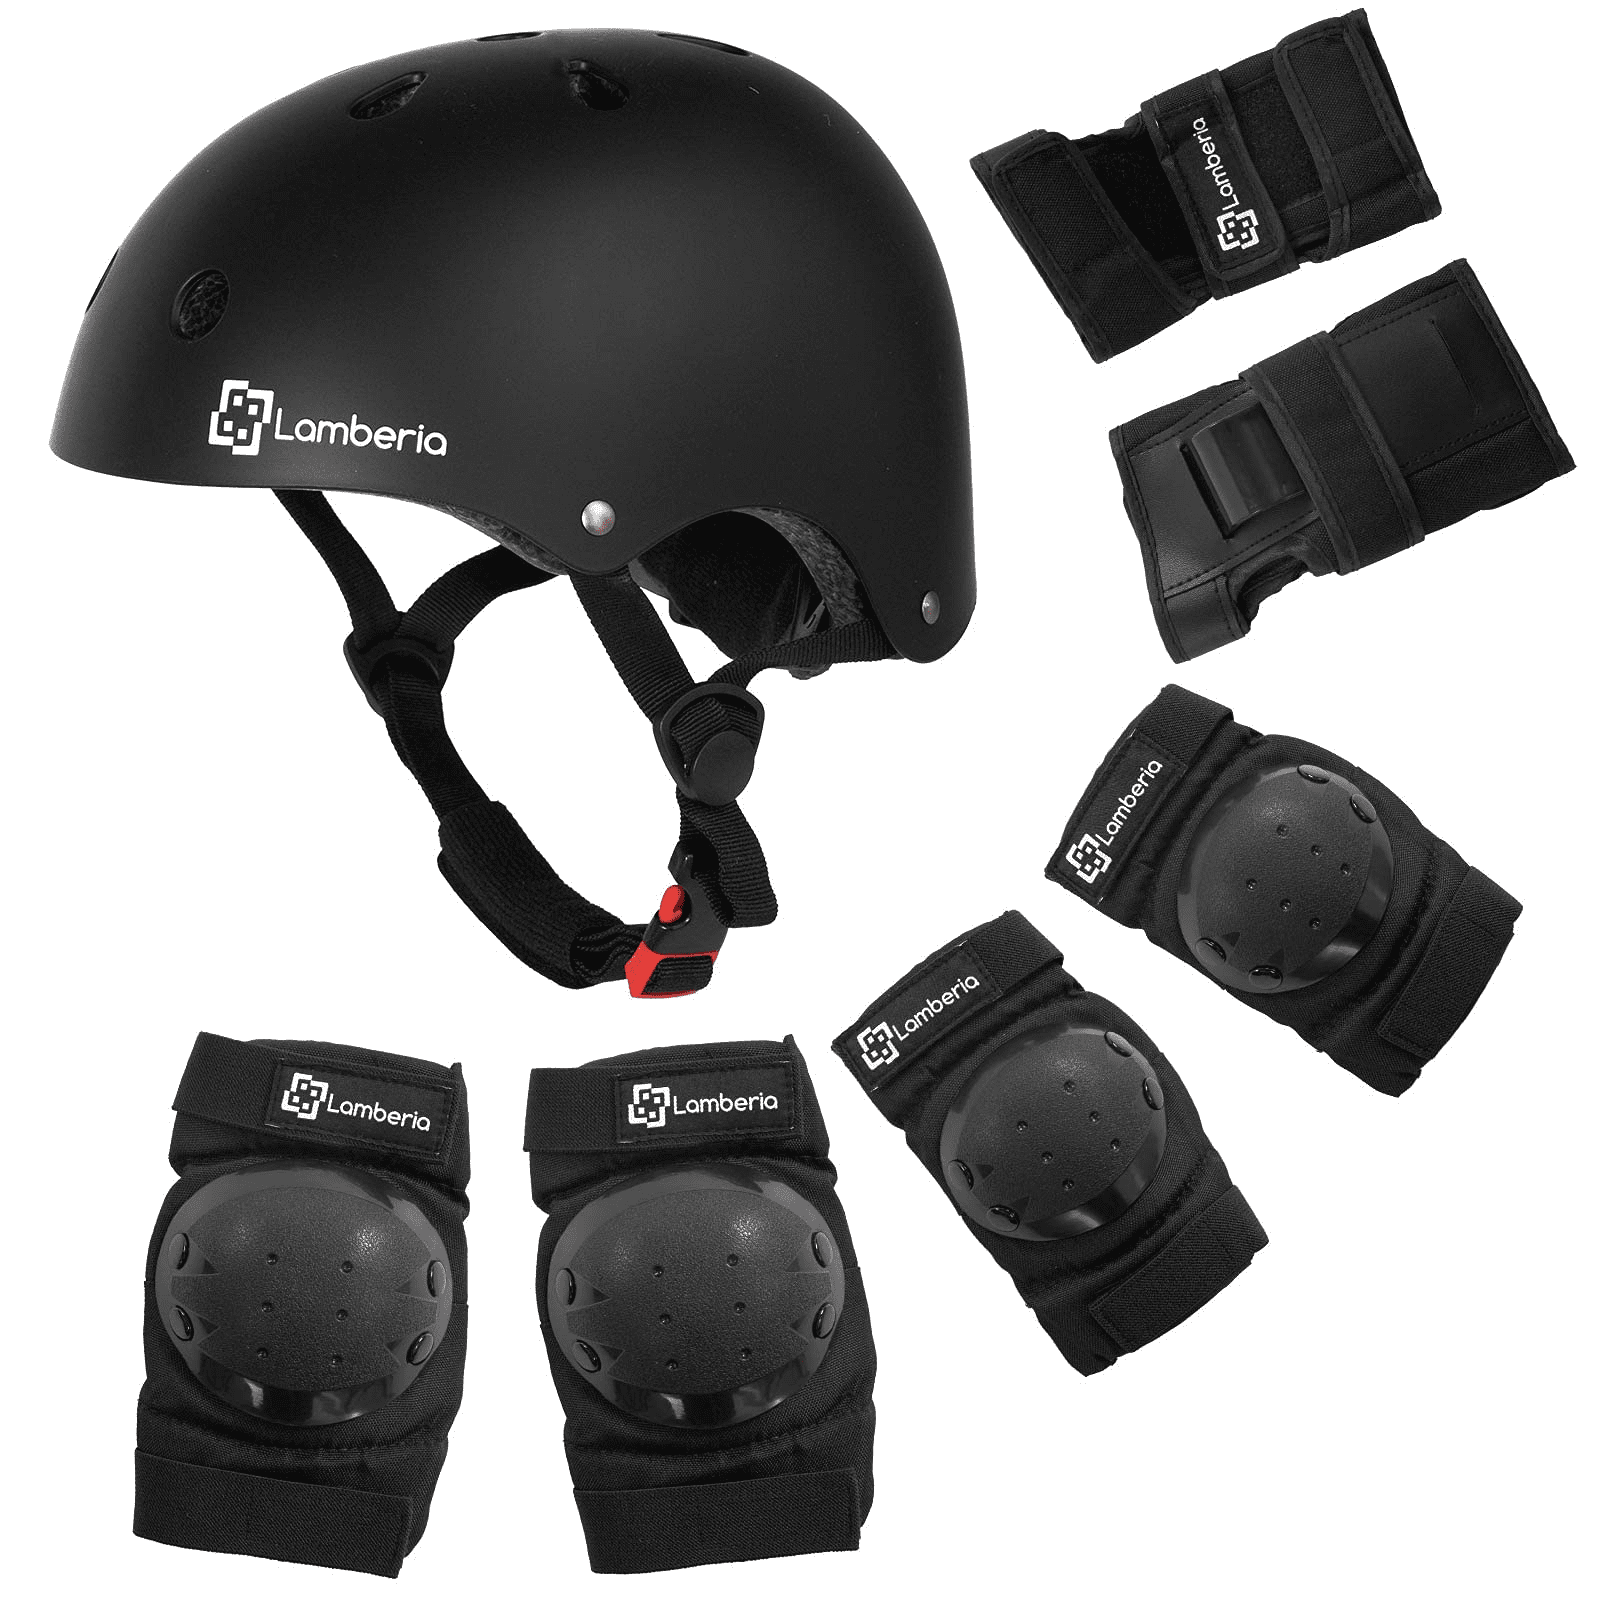 CPSC Certified Multisport Helmet Wrist Elbow Knee Pads for Skateboarding 3 to 8 Years Old Boys Girls TOURNOW Kids Protective Gear Sets Skating BMX Scooter Cycling 